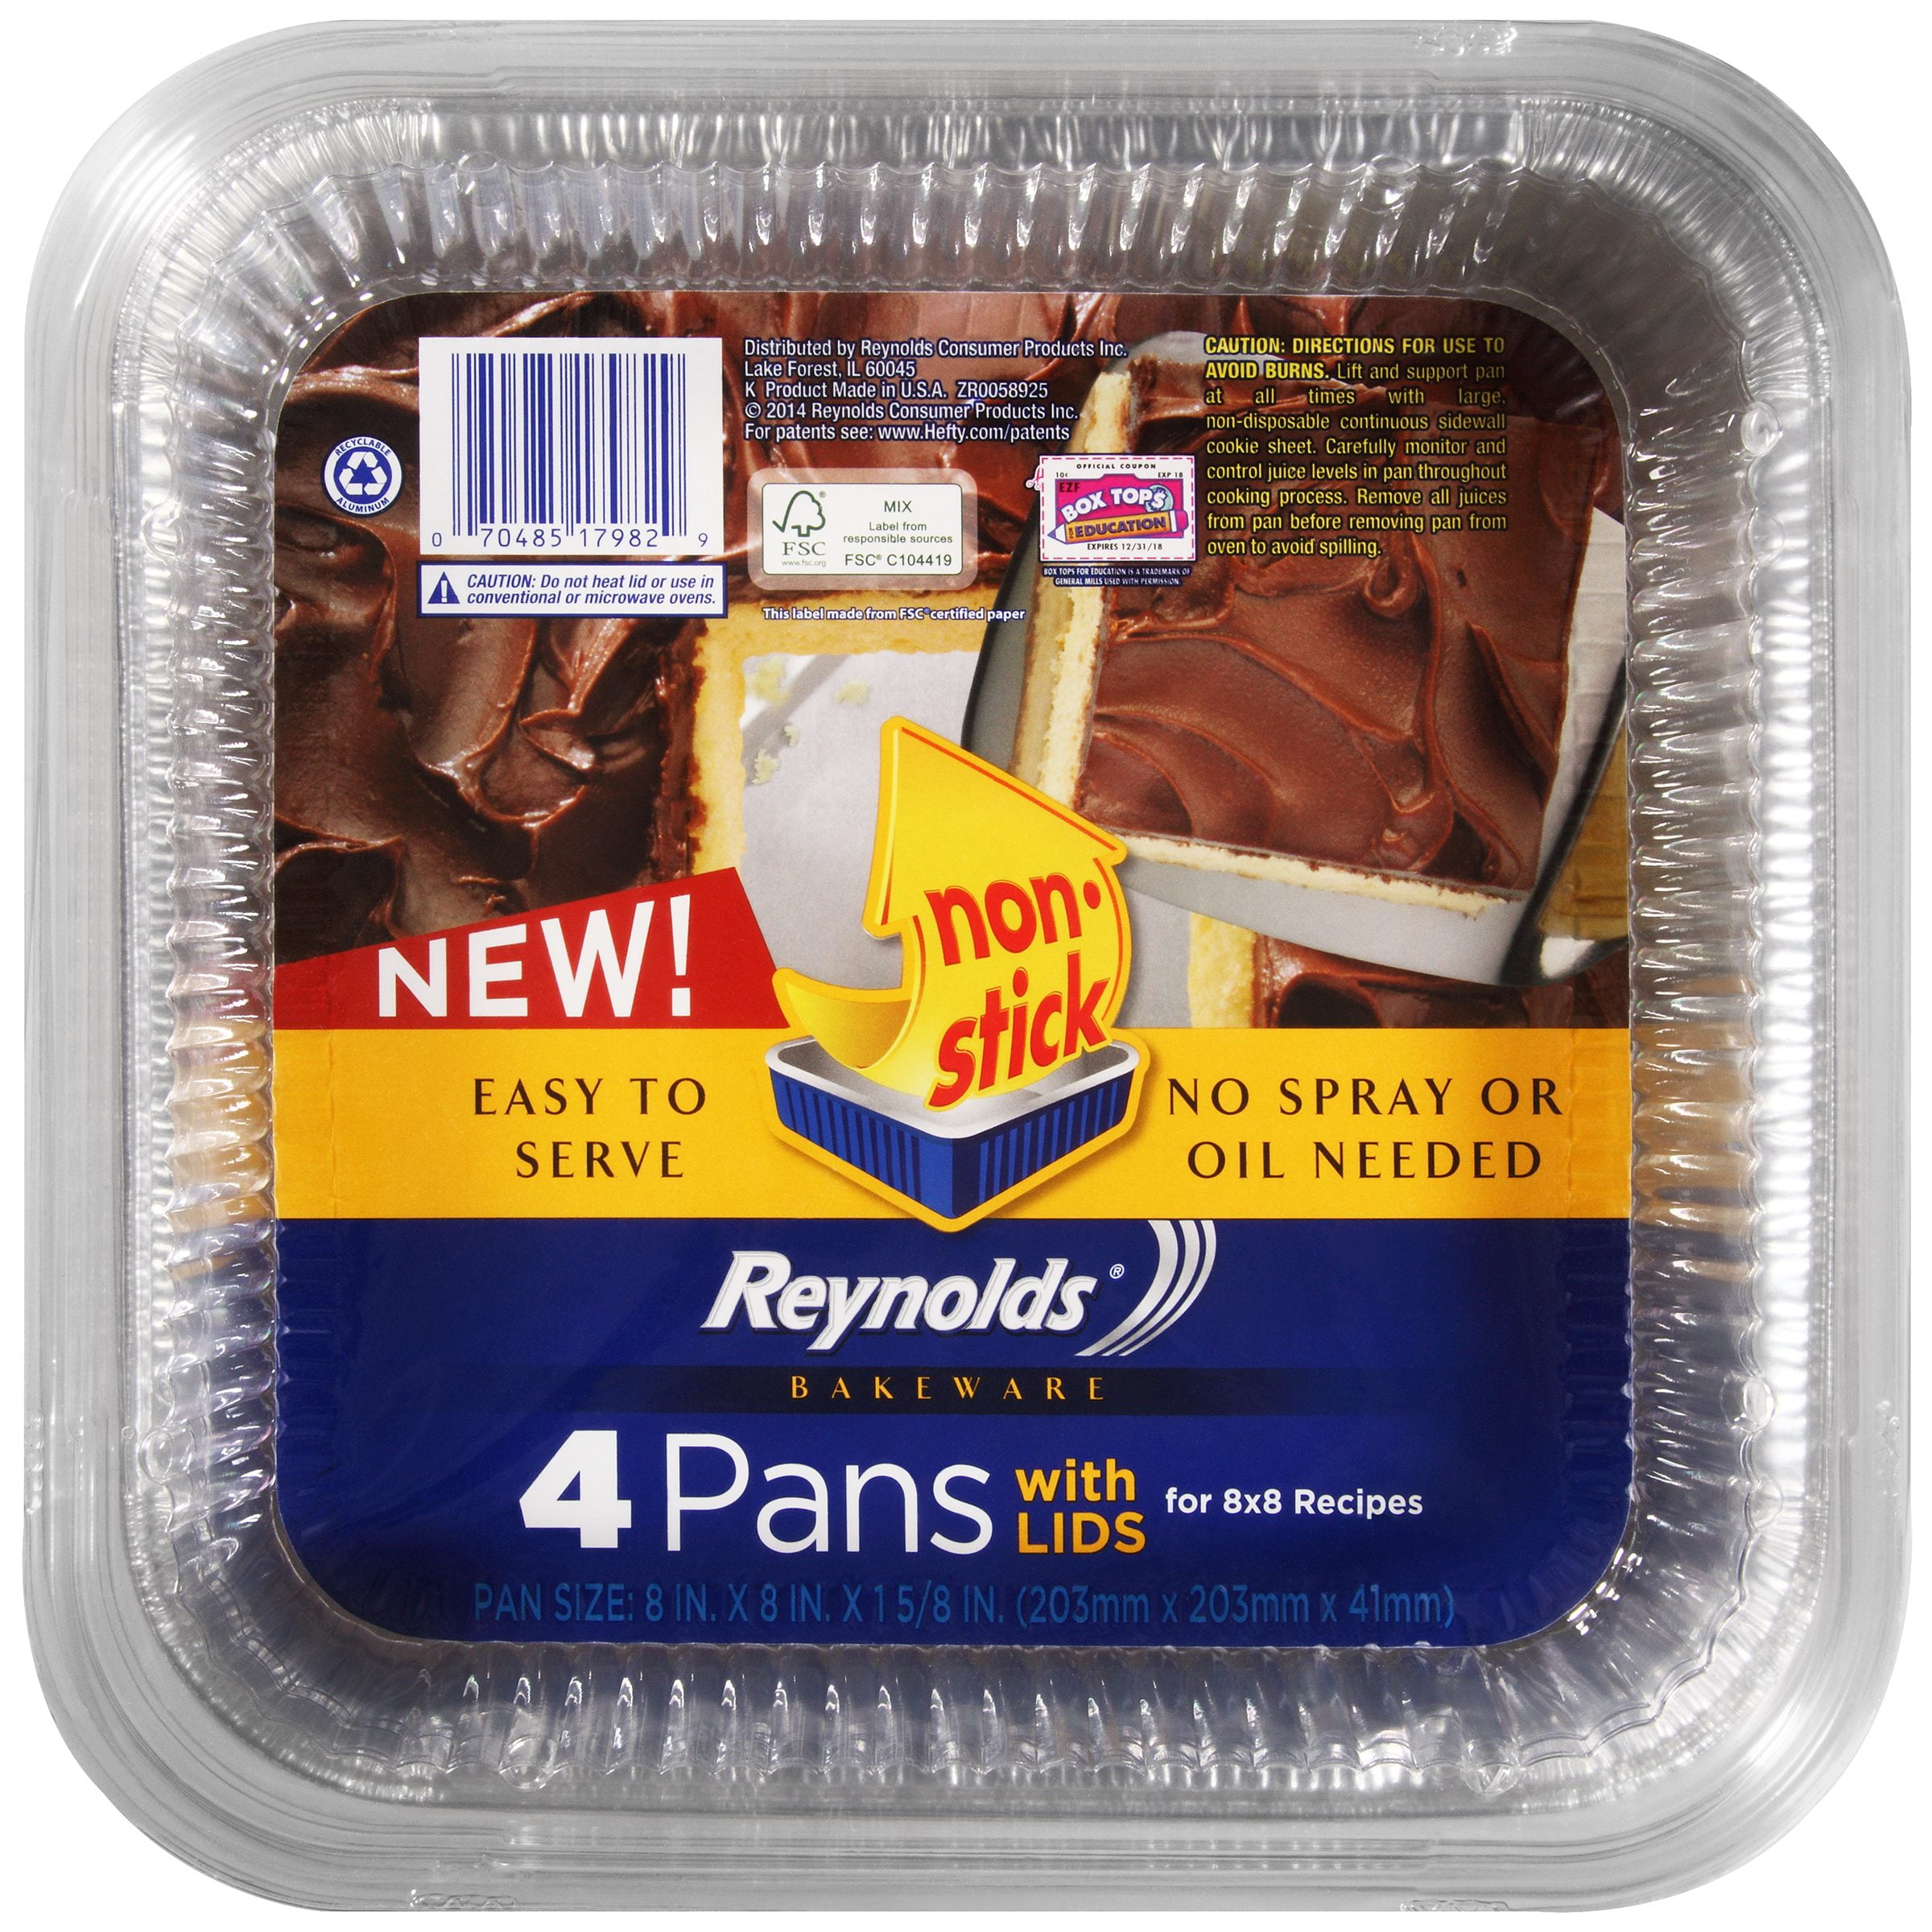 Reynolds Kitchens Non Stick Cookie Sheets - Shop Bakeware at H-E-B